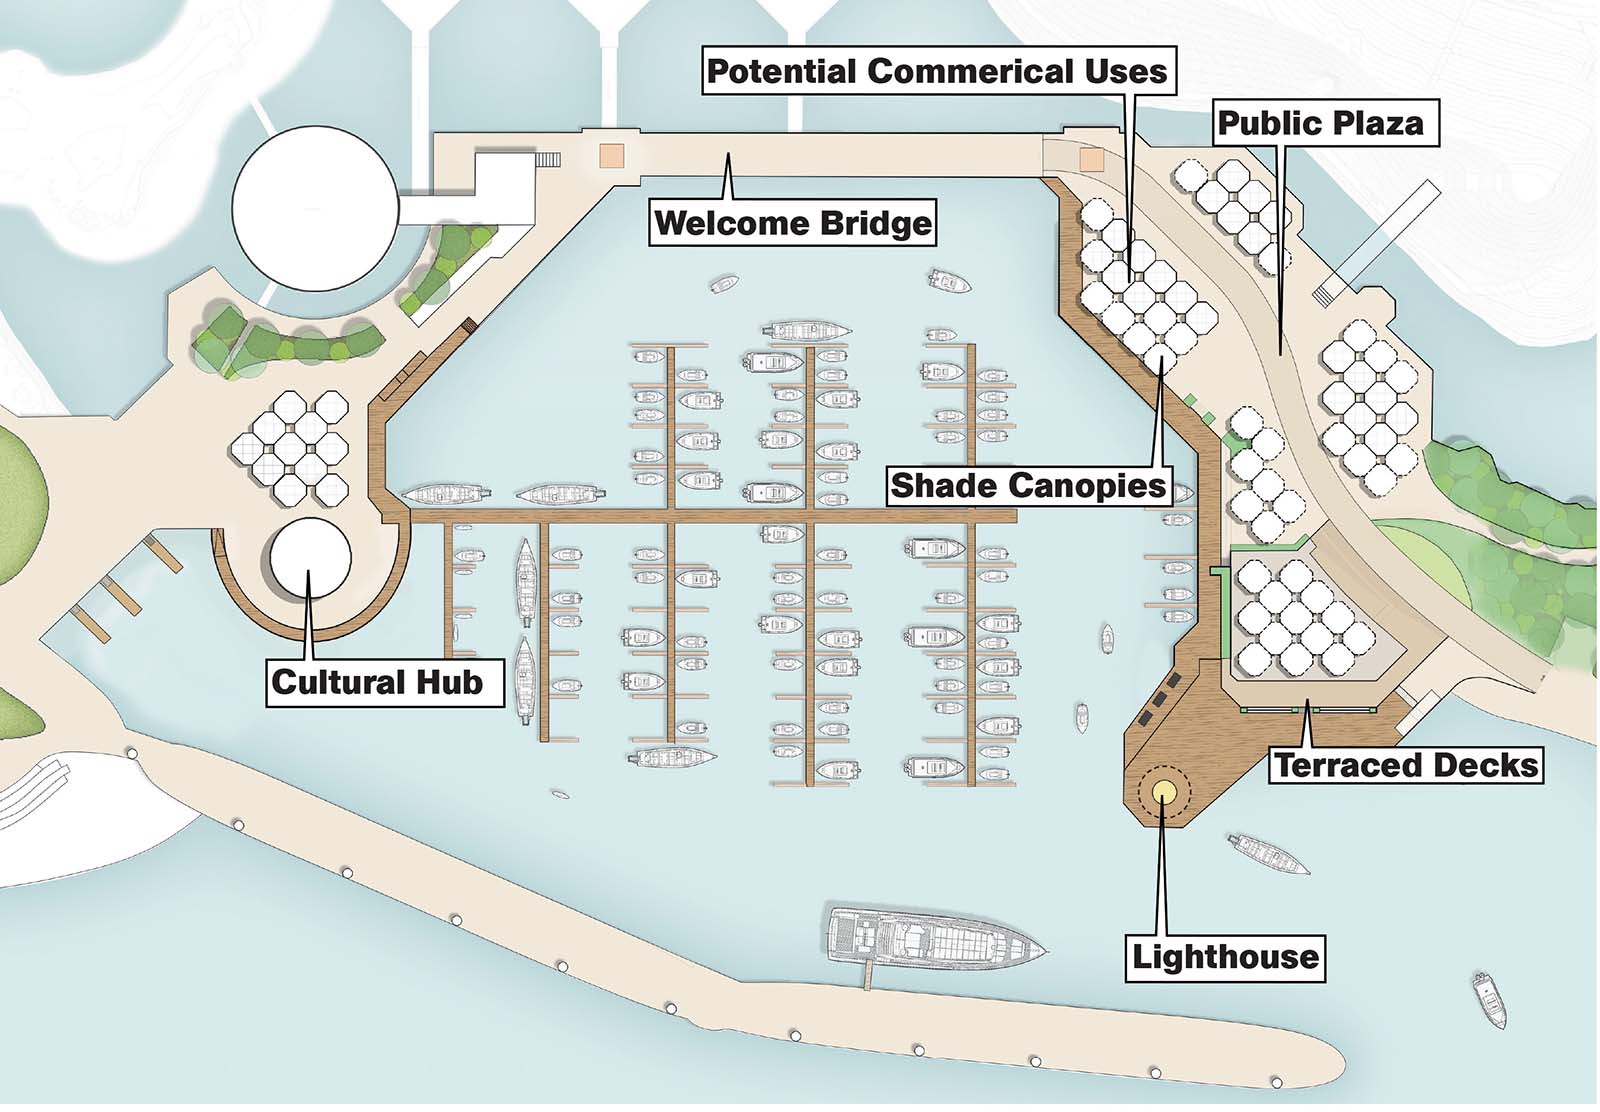 Rendered image of the marina showing a lighthouse, and terraced docks on the south-east side. The north-east side shows shade canopies, a public plaza and potential commercial uses. The west side shows a cultural hub and a welcome bridge connects the east and west sides.